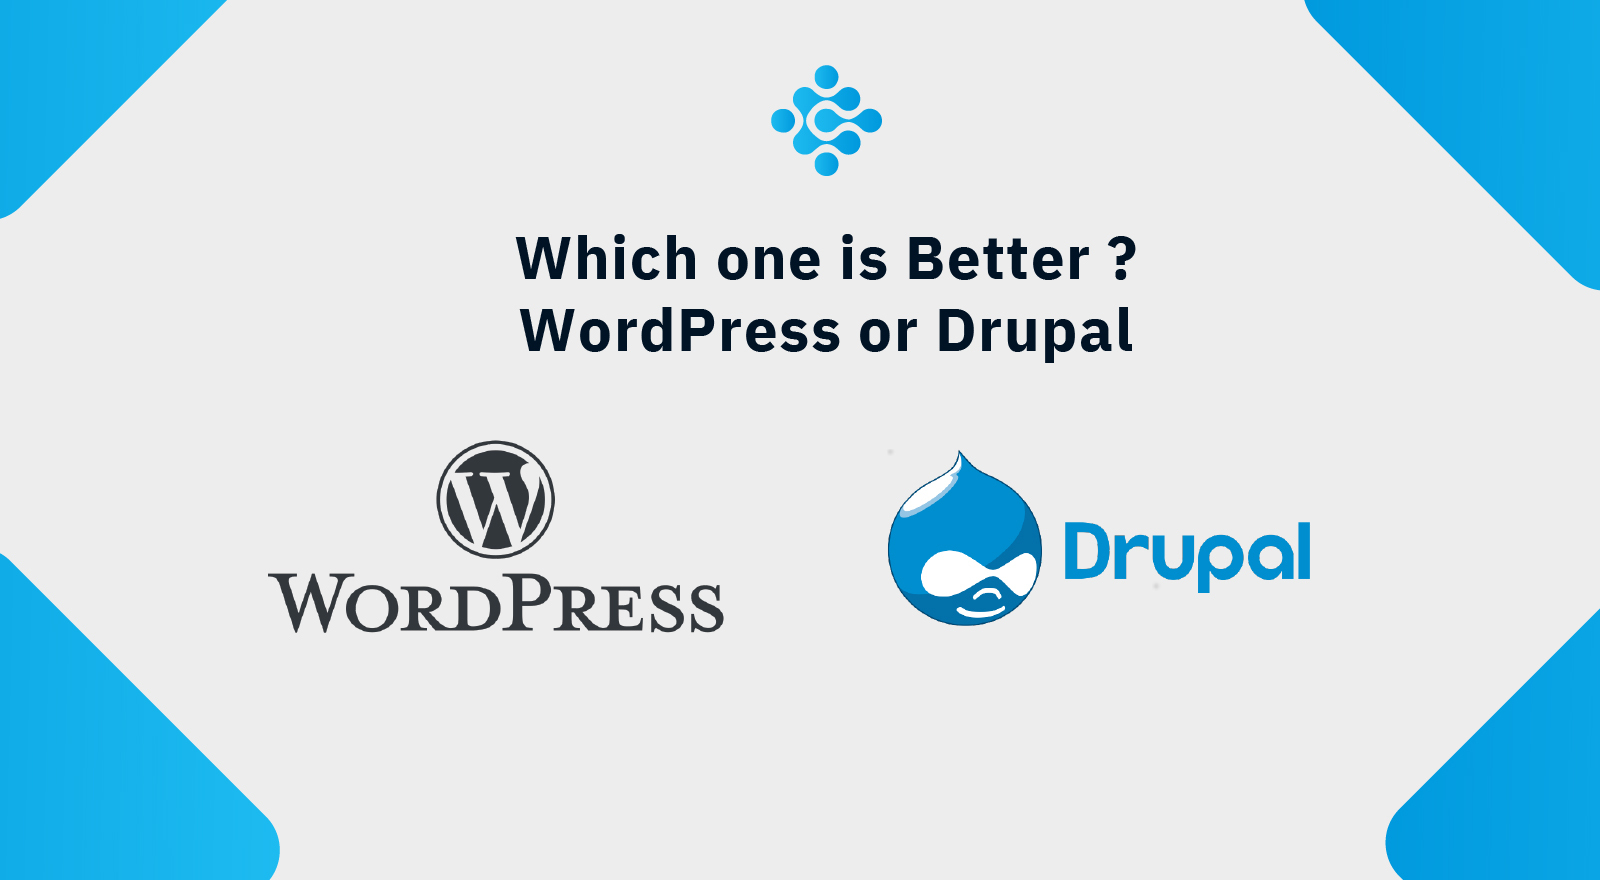 Which one is better: WordPress or Drupal